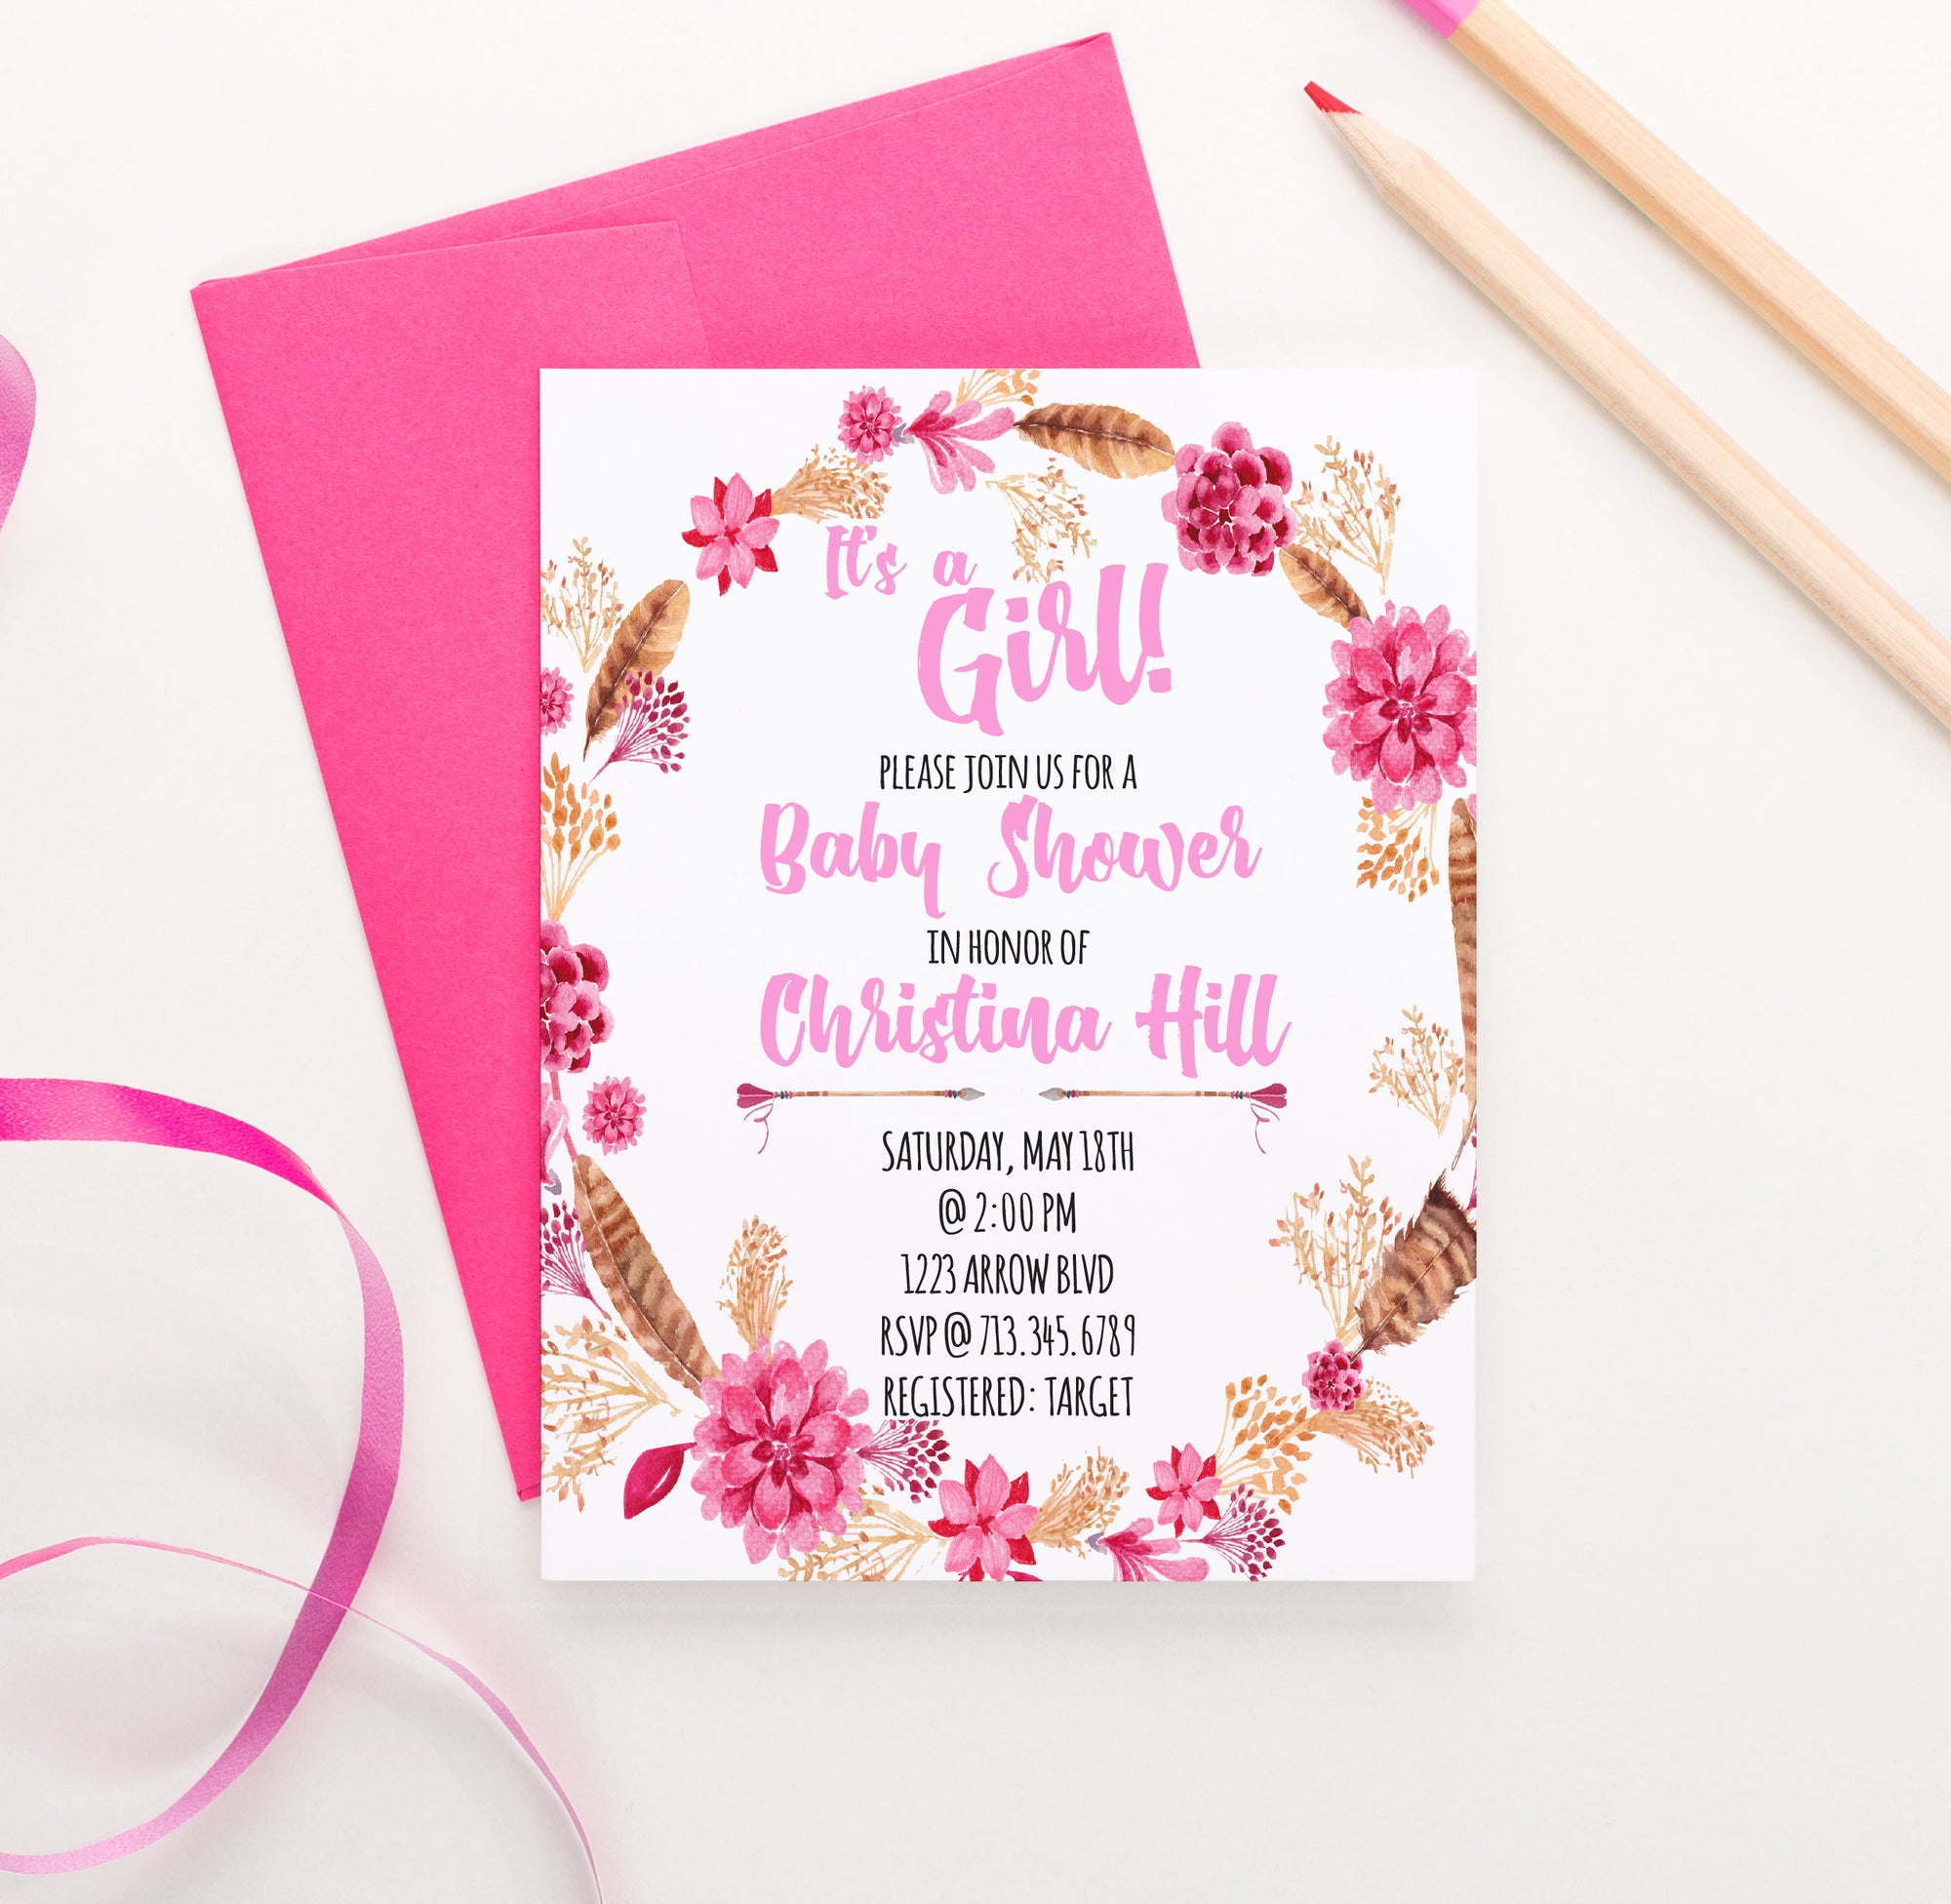 Boho Pink Floral Baby Shower Invitations With Feathers